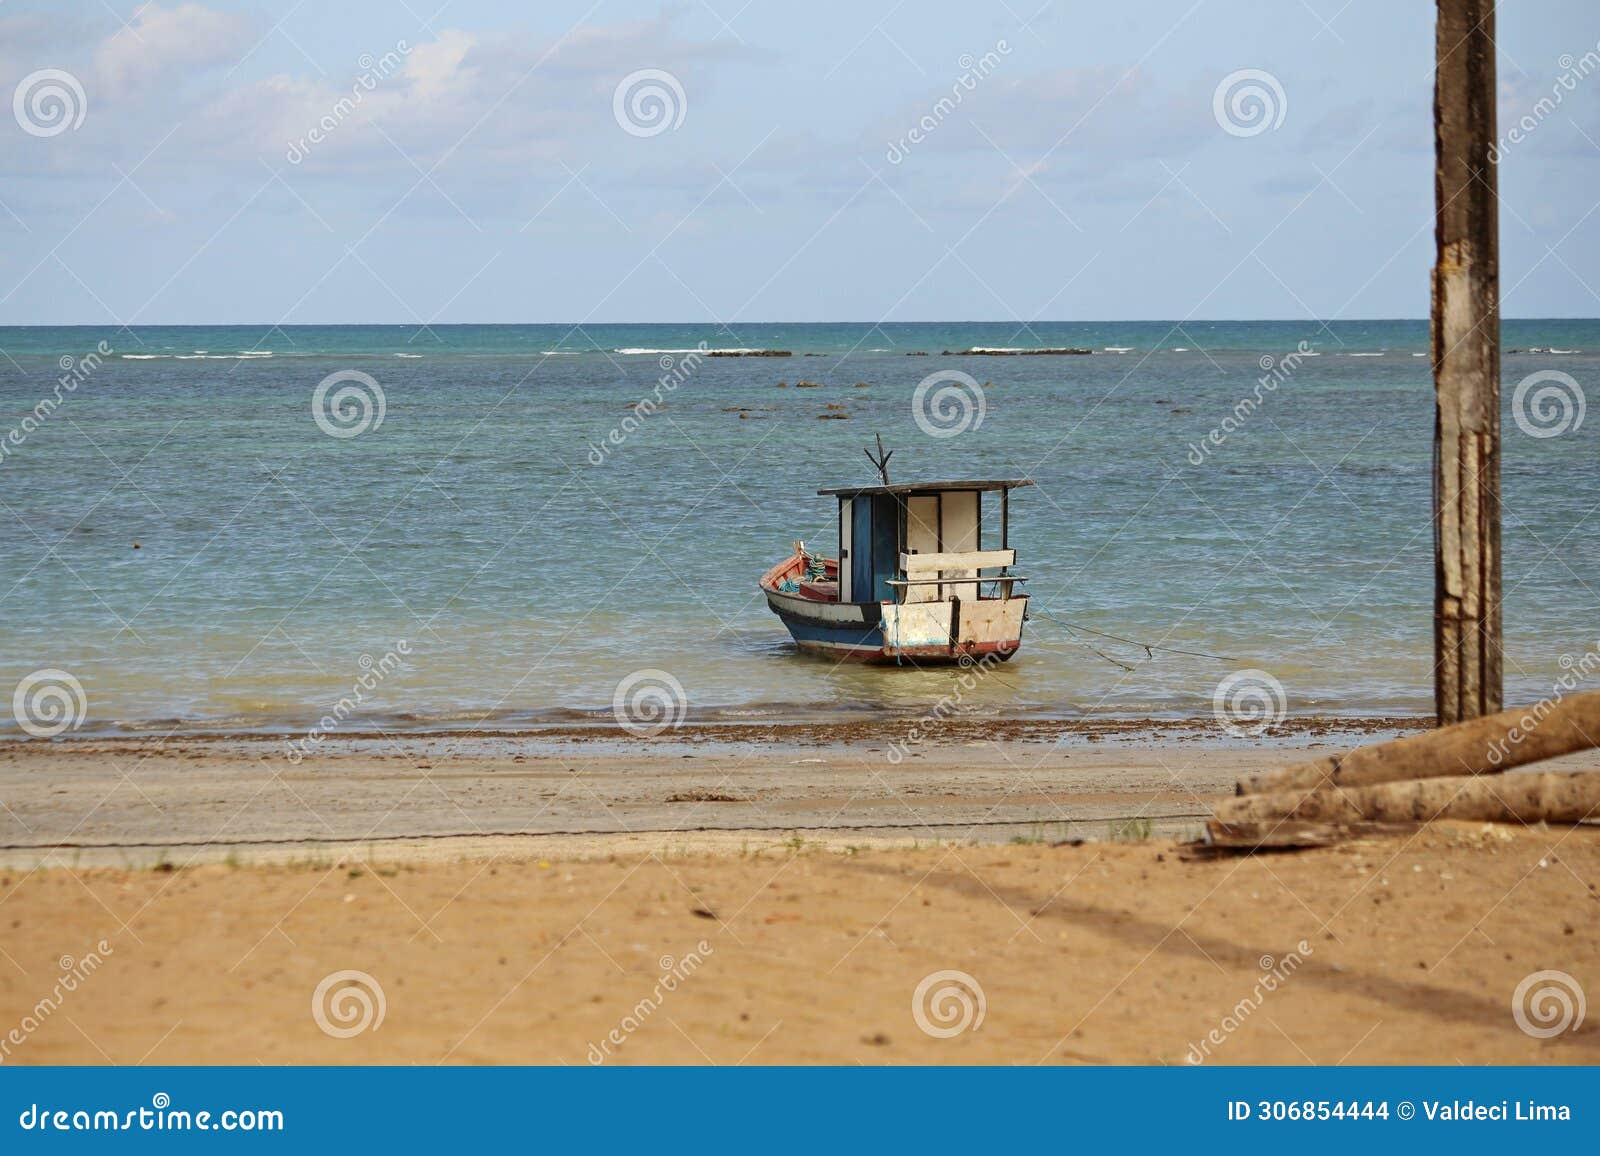 small boat anchored on beach water edge